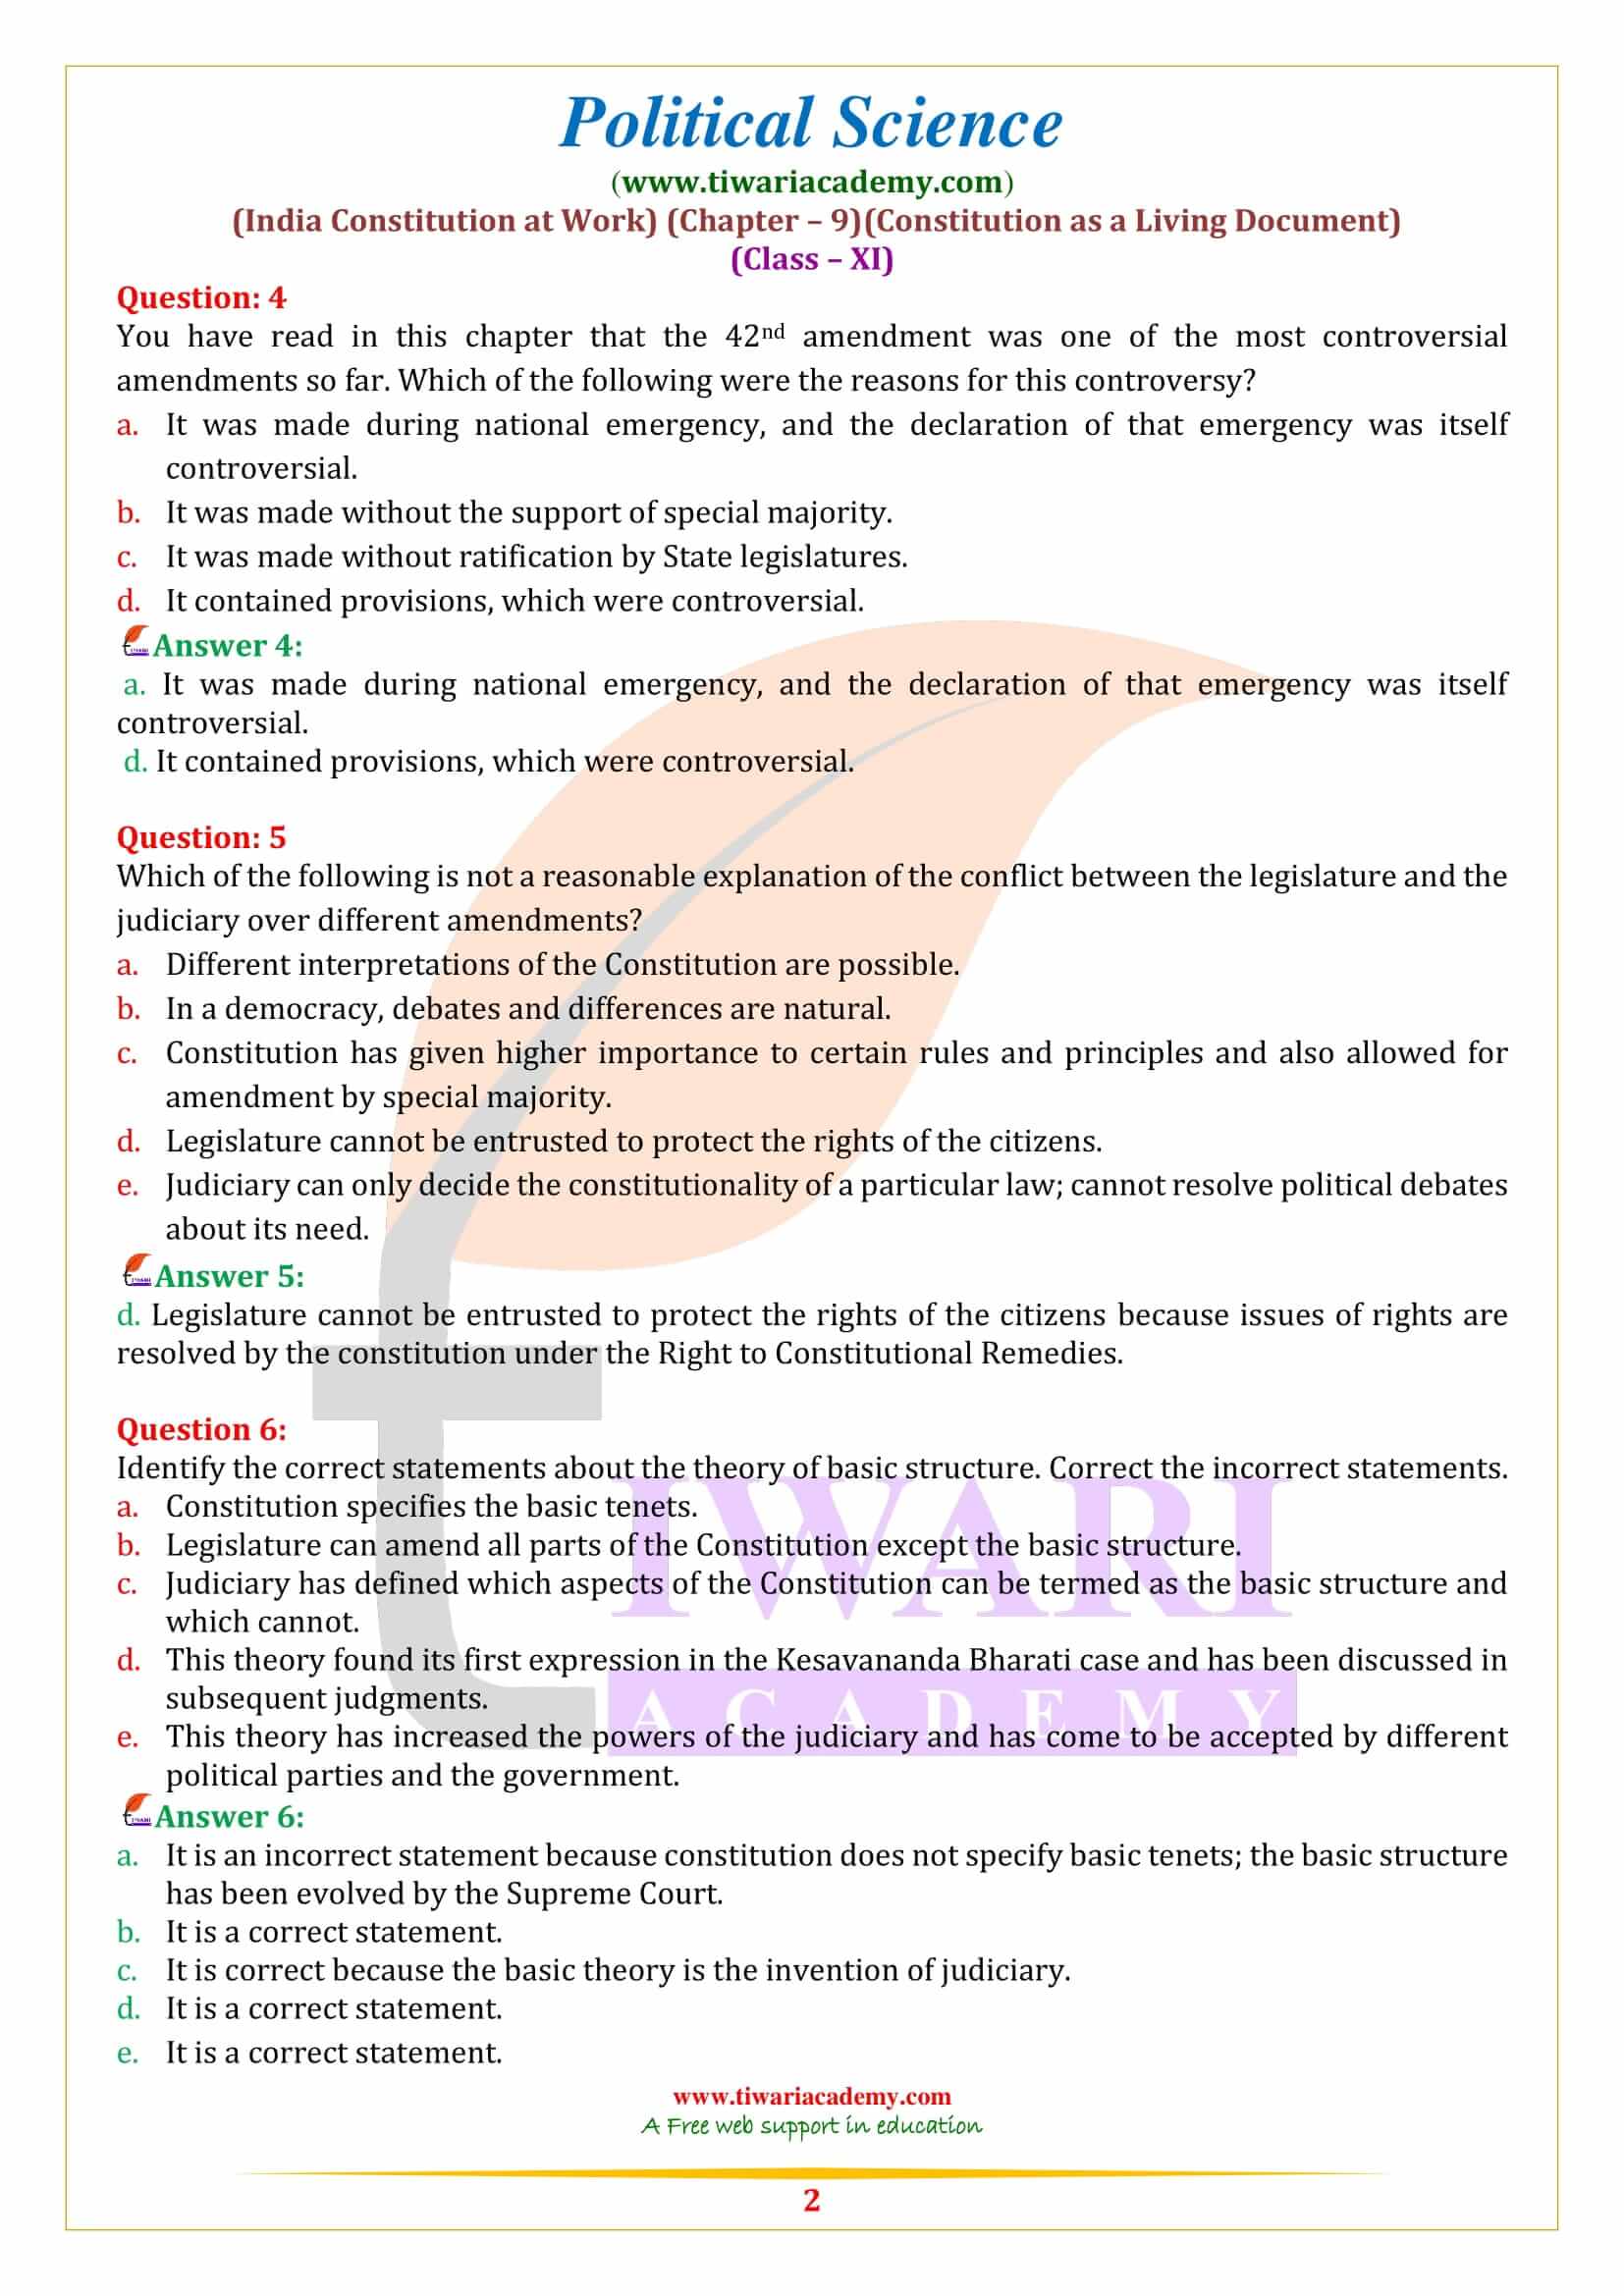 NCERT Solutions for Class 11 Political Science Chapter 9